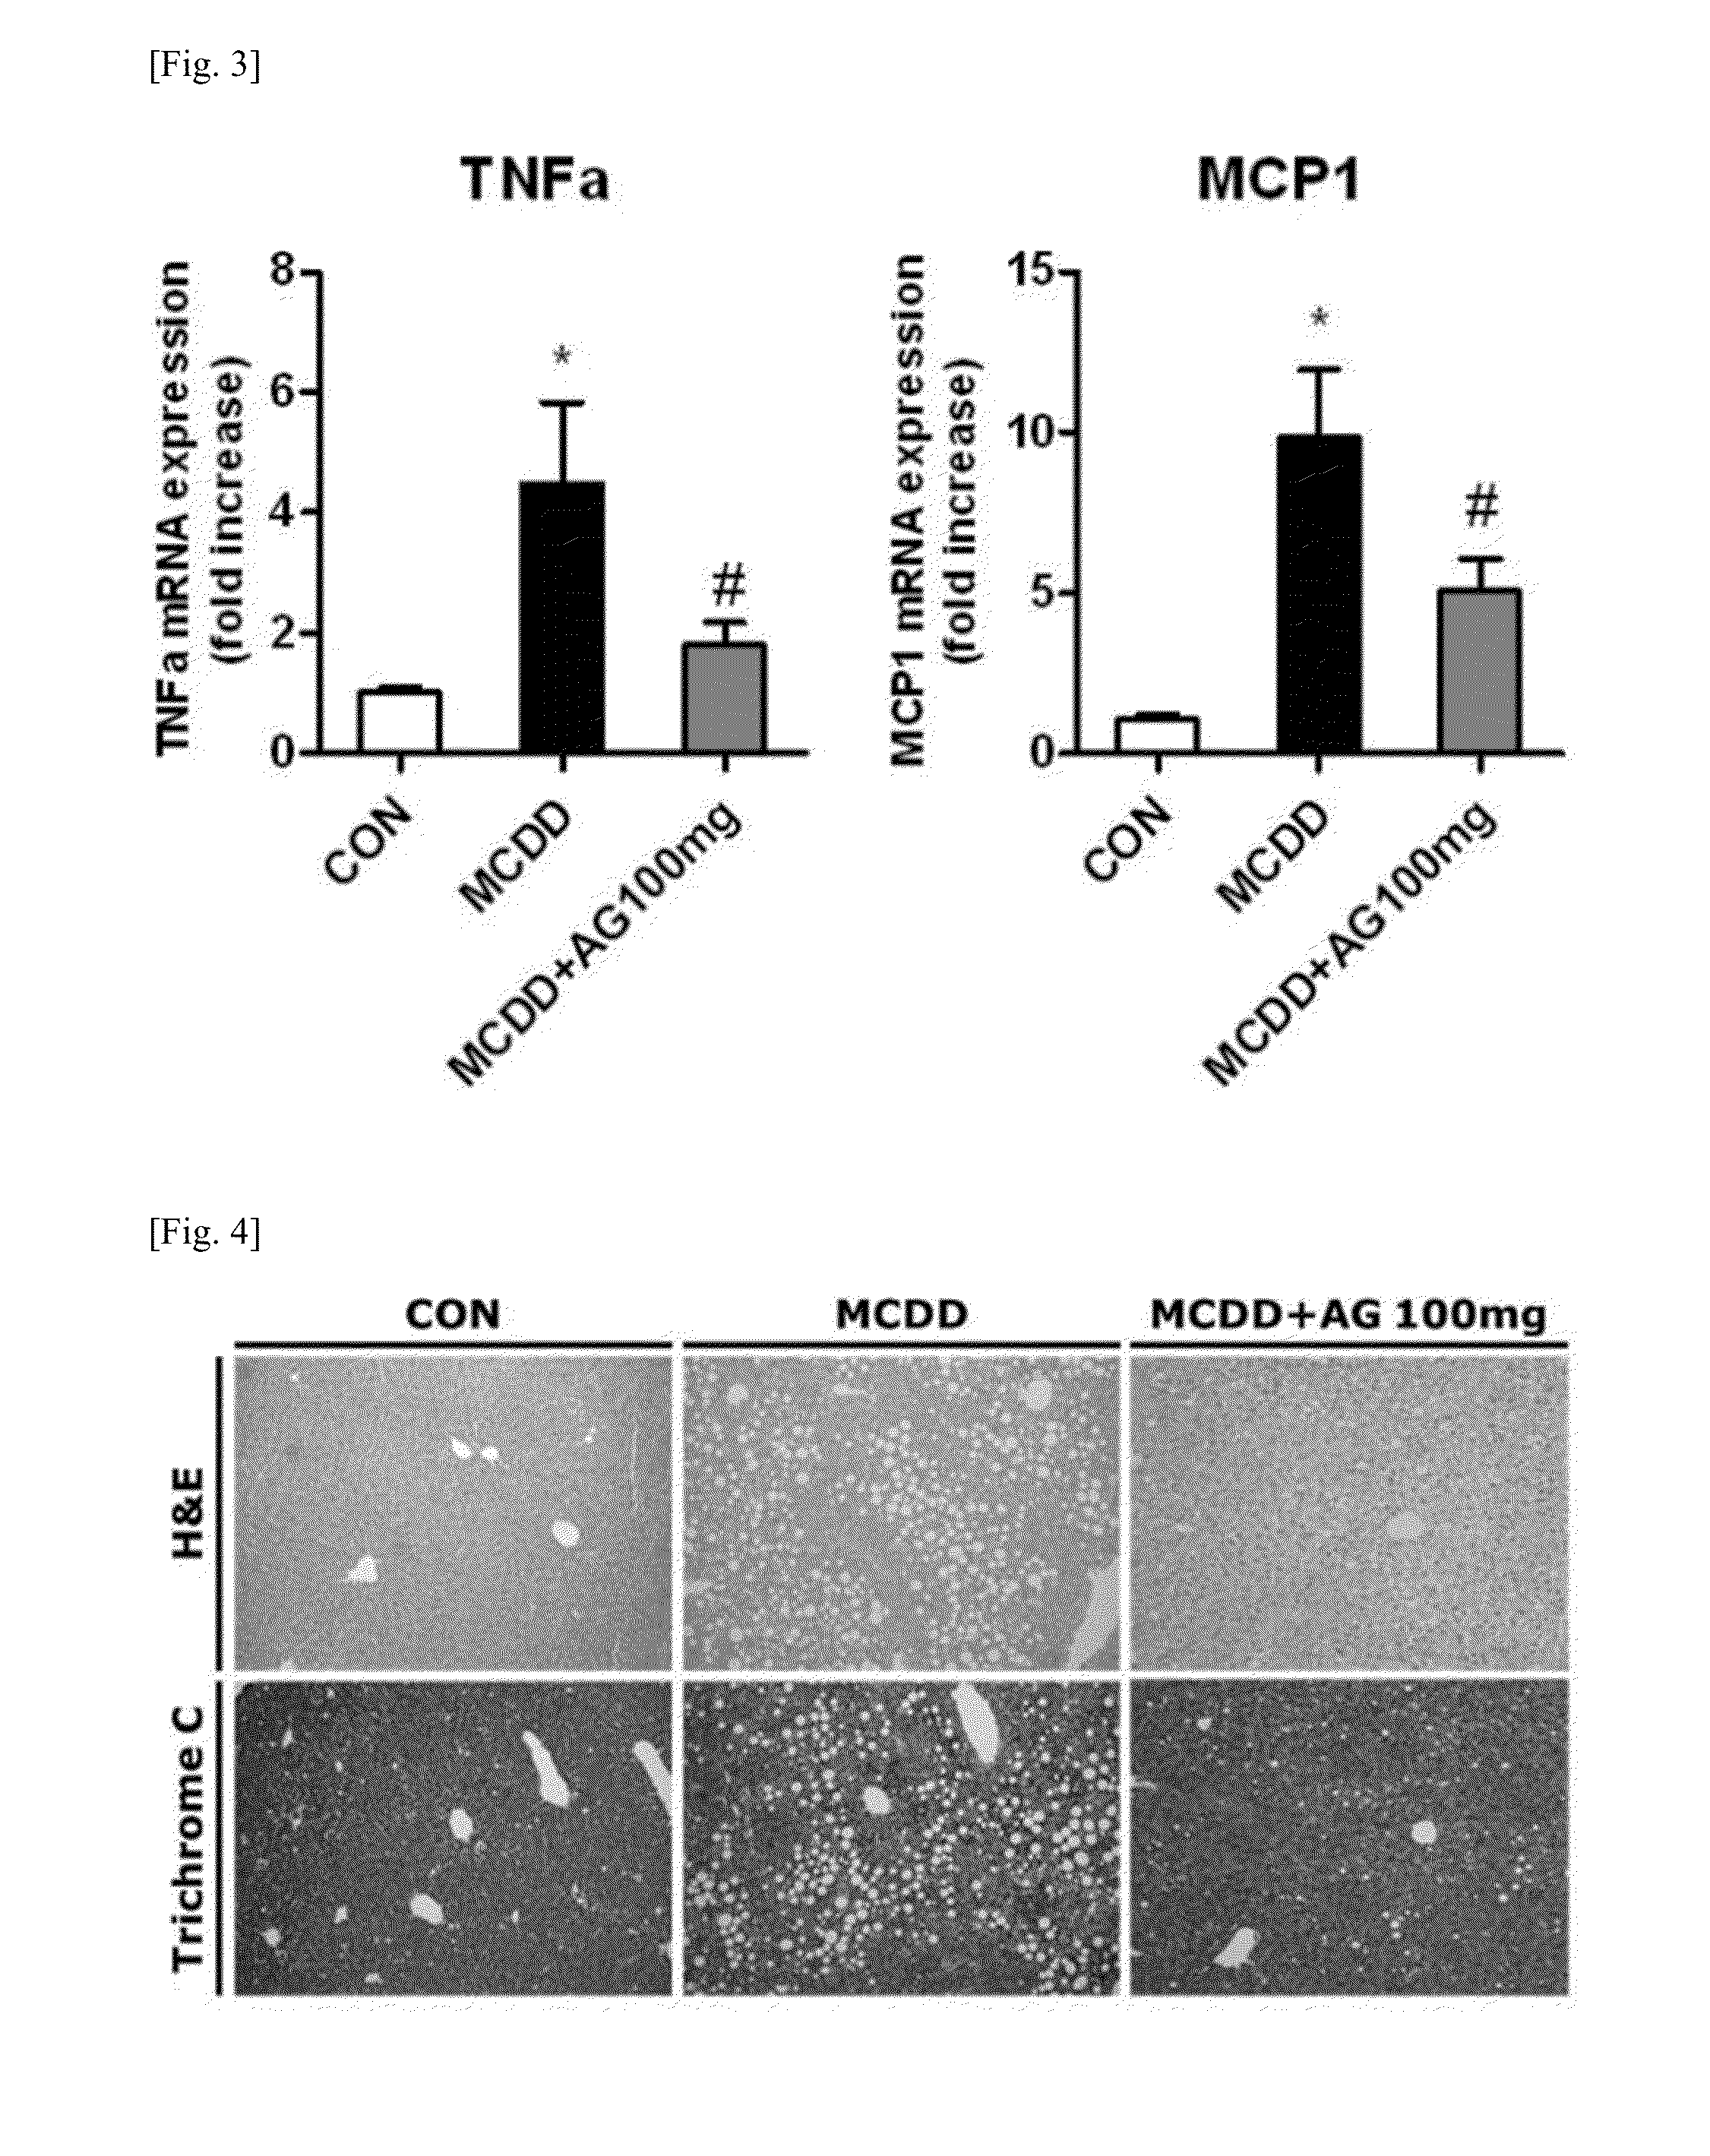 Pharmaceutical composition for preventing or treating liver diseases, containing plasmalogen precursor, plasmalogen or plasmalogen analog as effective component